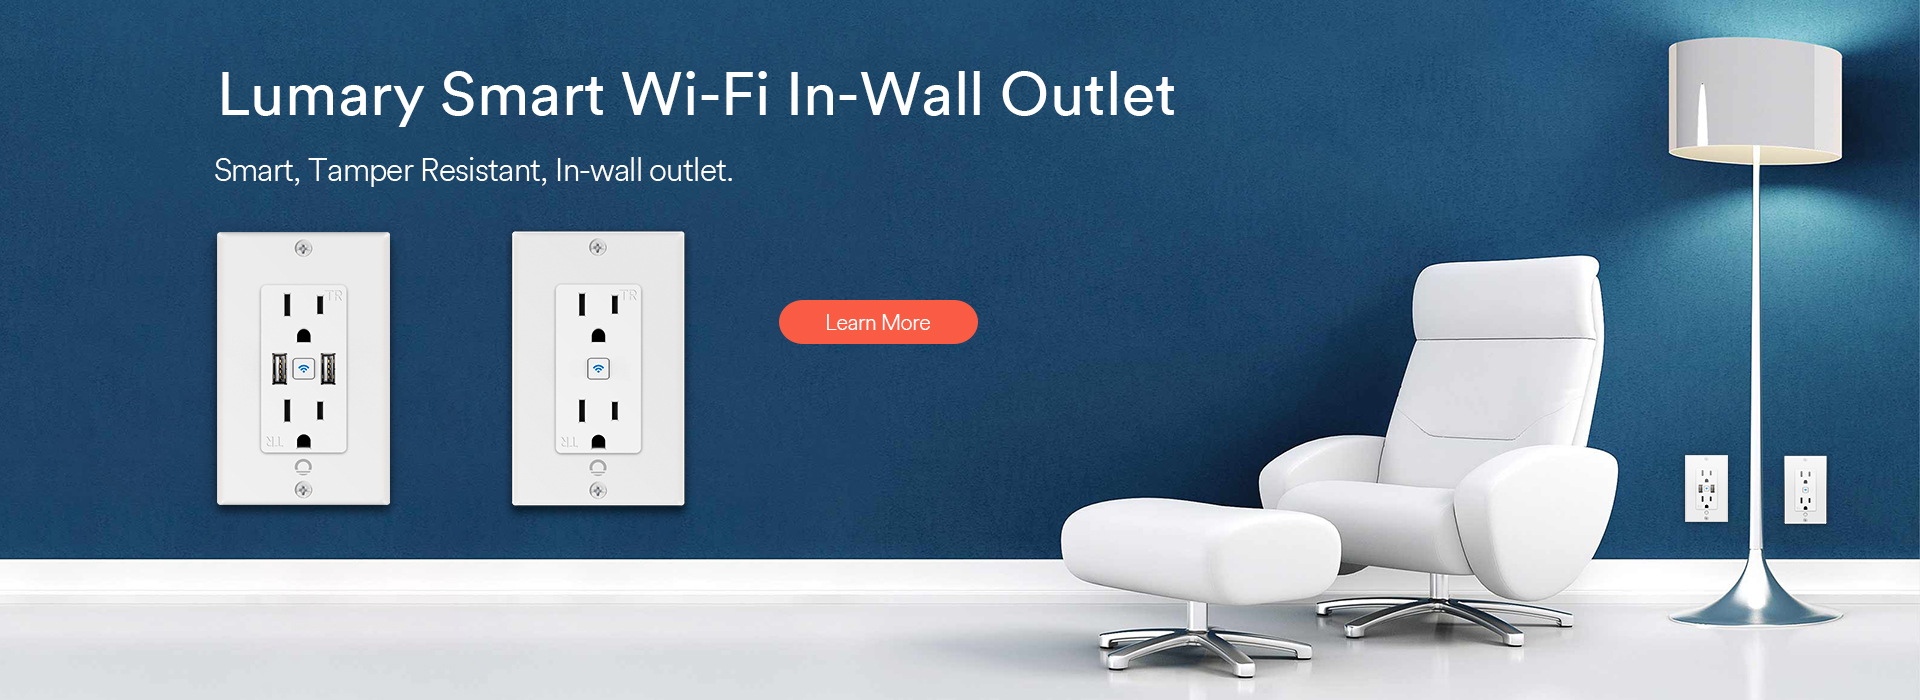 Lumary Smart Wi-Fi Outlet USB Fast Charger in Wall Works with Alexa &  Google Assistant